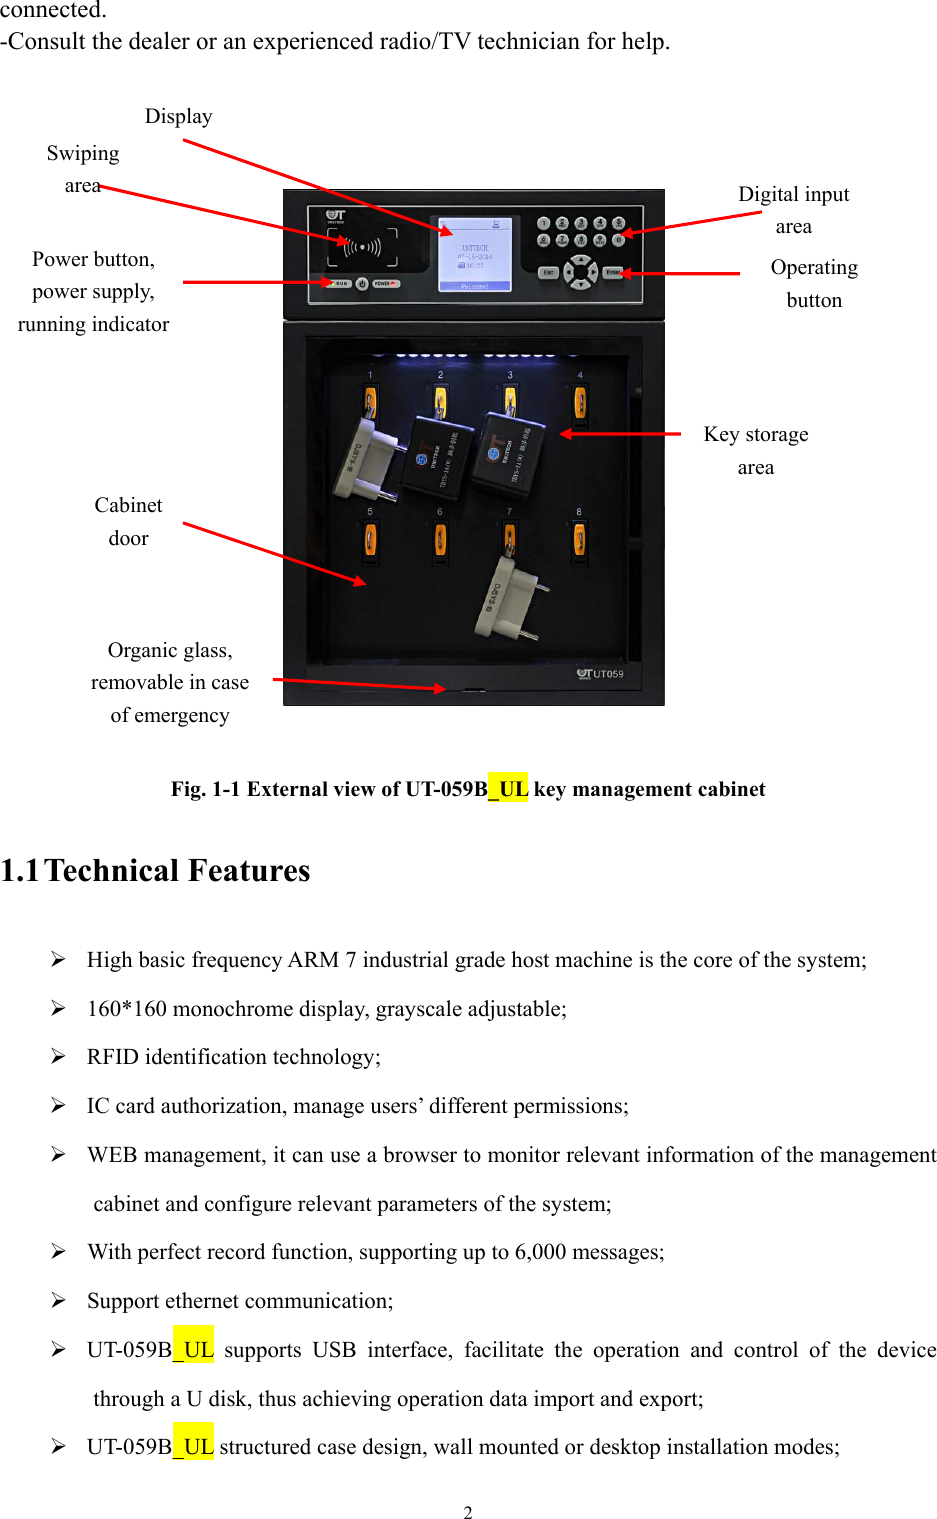 2  connected. -Consult the dealer or an experienced radio/TV technician for help.         Fig. 1-1 External view of UT-059B_UL key management cabinet  1.1 Technical  Features   High basic frequency ARM 7 industrial grade host machine is the core of the system;  160*160 monochrome display, grayscale adjustable;  RFID identification technology;  IC card authorization, manage users’ different permissions;  WEB management, it can use a browser to monitor relevant information of the management cabinet and configure relevant parameters of the system;  With perfect record function, supporting up to 6,000 messages;  Support ethernet communication;  UT-059B_UL supports USB interface, facilitate the operation and control of the device through a U disk, thus achieving operation data import and export;  UT-059B_UL structured case design, wall mounted or desktop installation modes; Cabinet door Organic glass, removable in case of emergency  Swiping area Power button, power supply, running indicator Display Digital input area  Operating button  Key storage area  